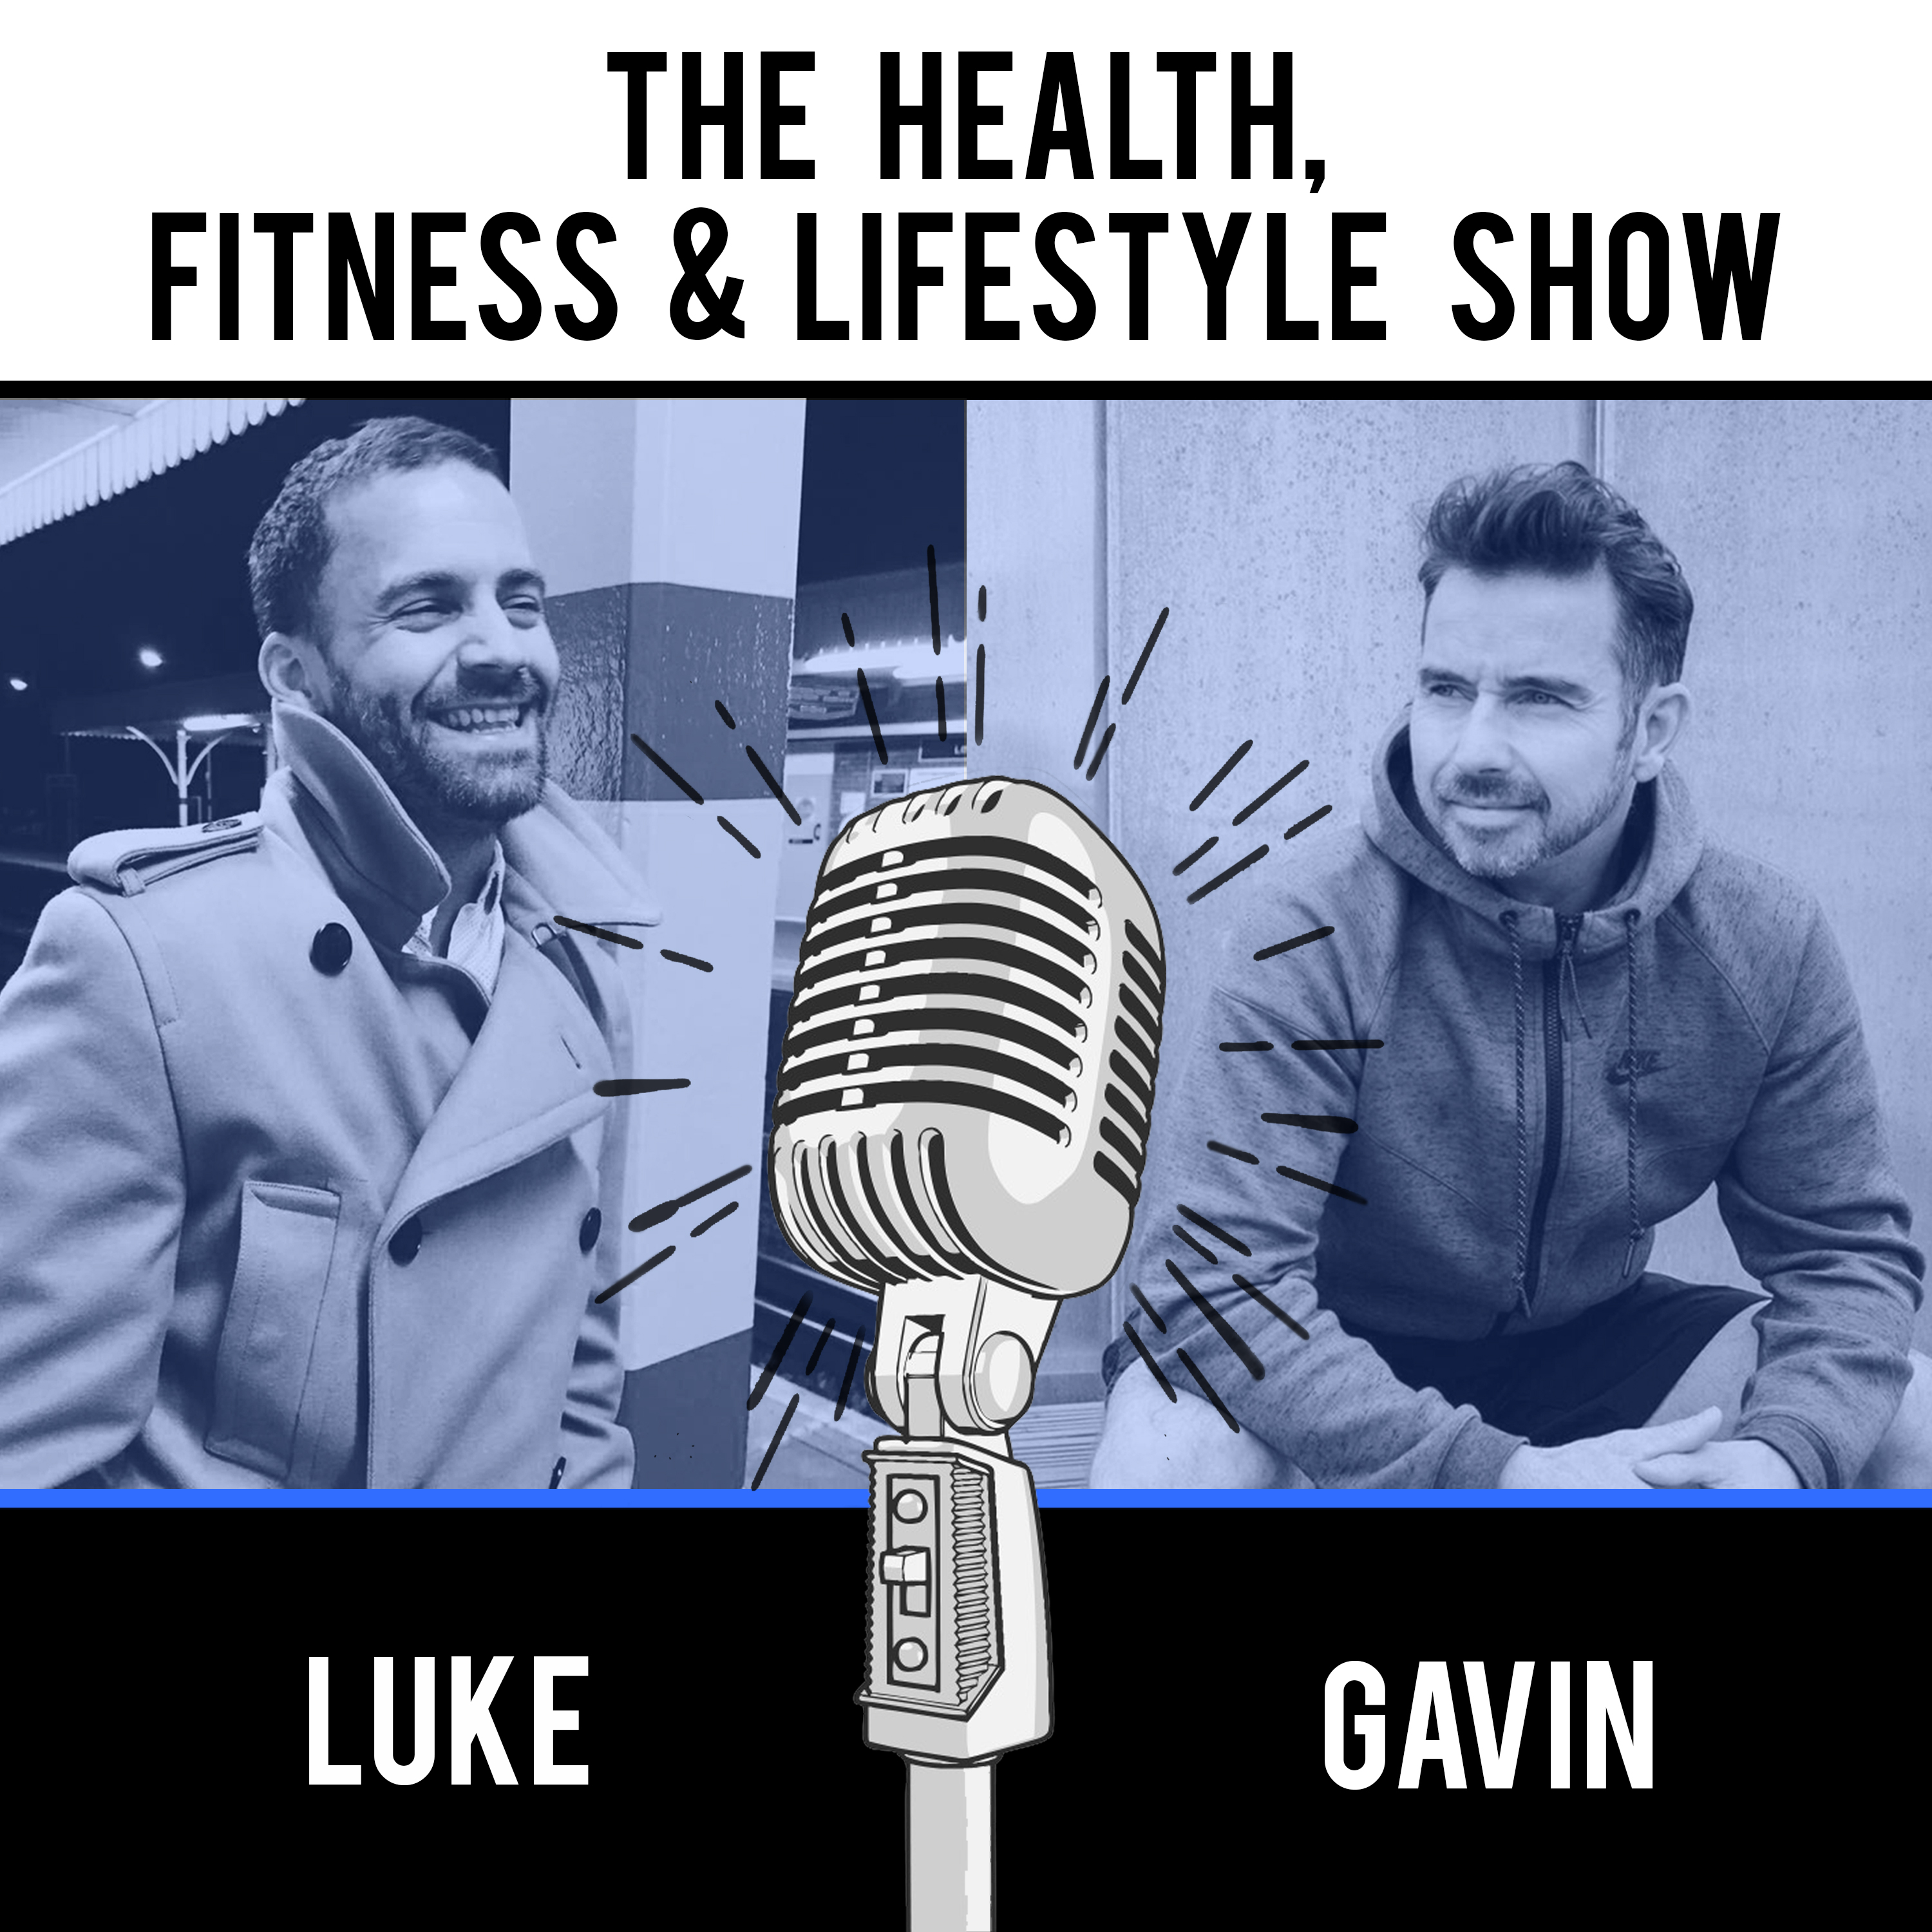 The Health, Fitness and Lifestyle Show pdcast with Michael Tobin